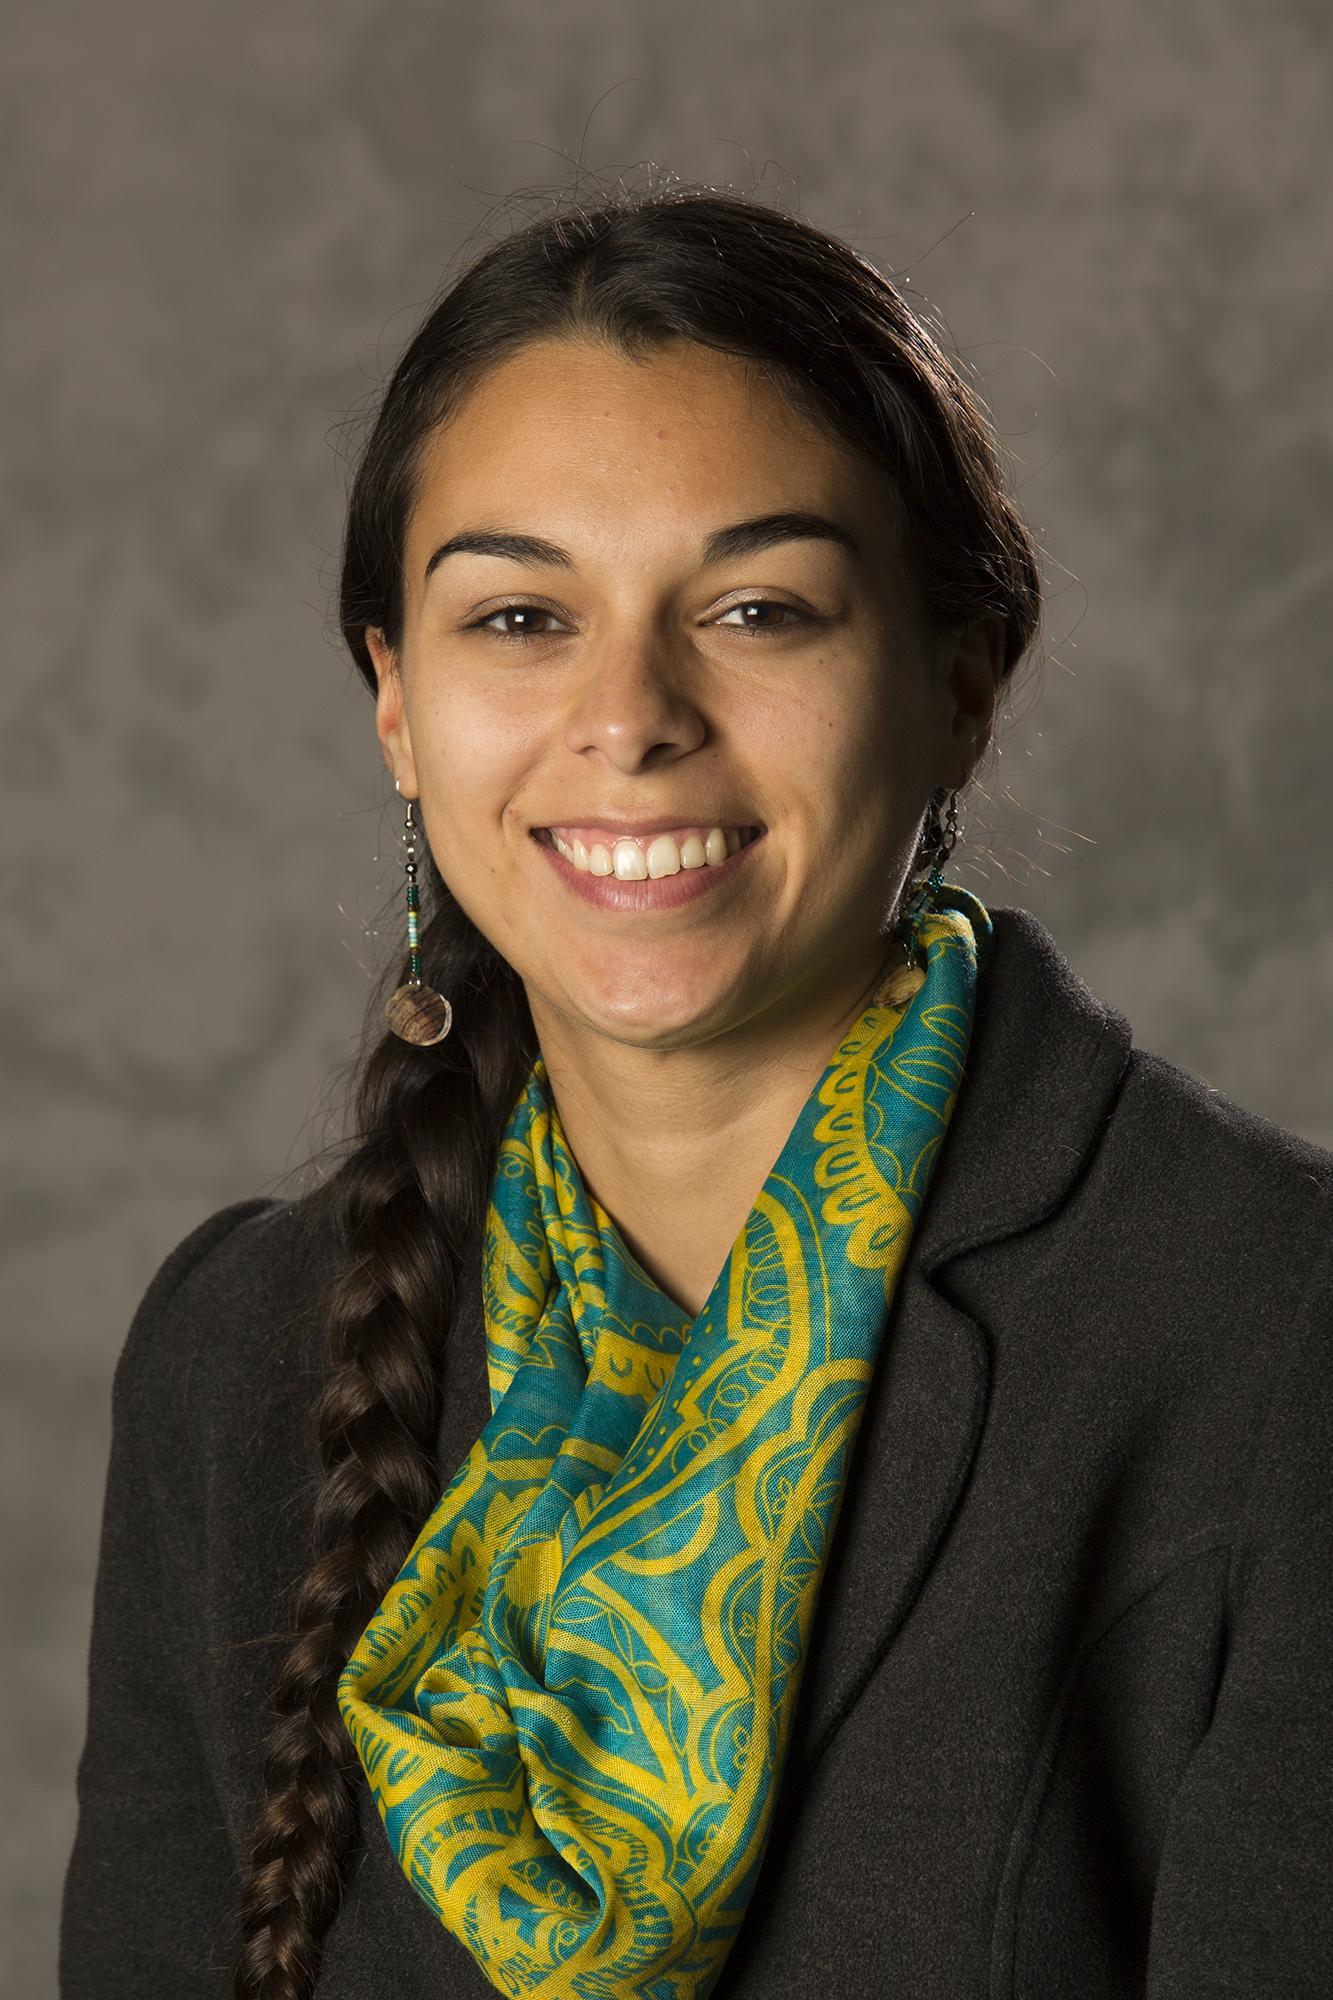 During her time at the CoJMC, Schlichting was a graduate assistant and played a major role as project coordinator for the depth reporting class that produced “The Wounds of Whiteclay: Nebraska’s Shameful Legacy.”